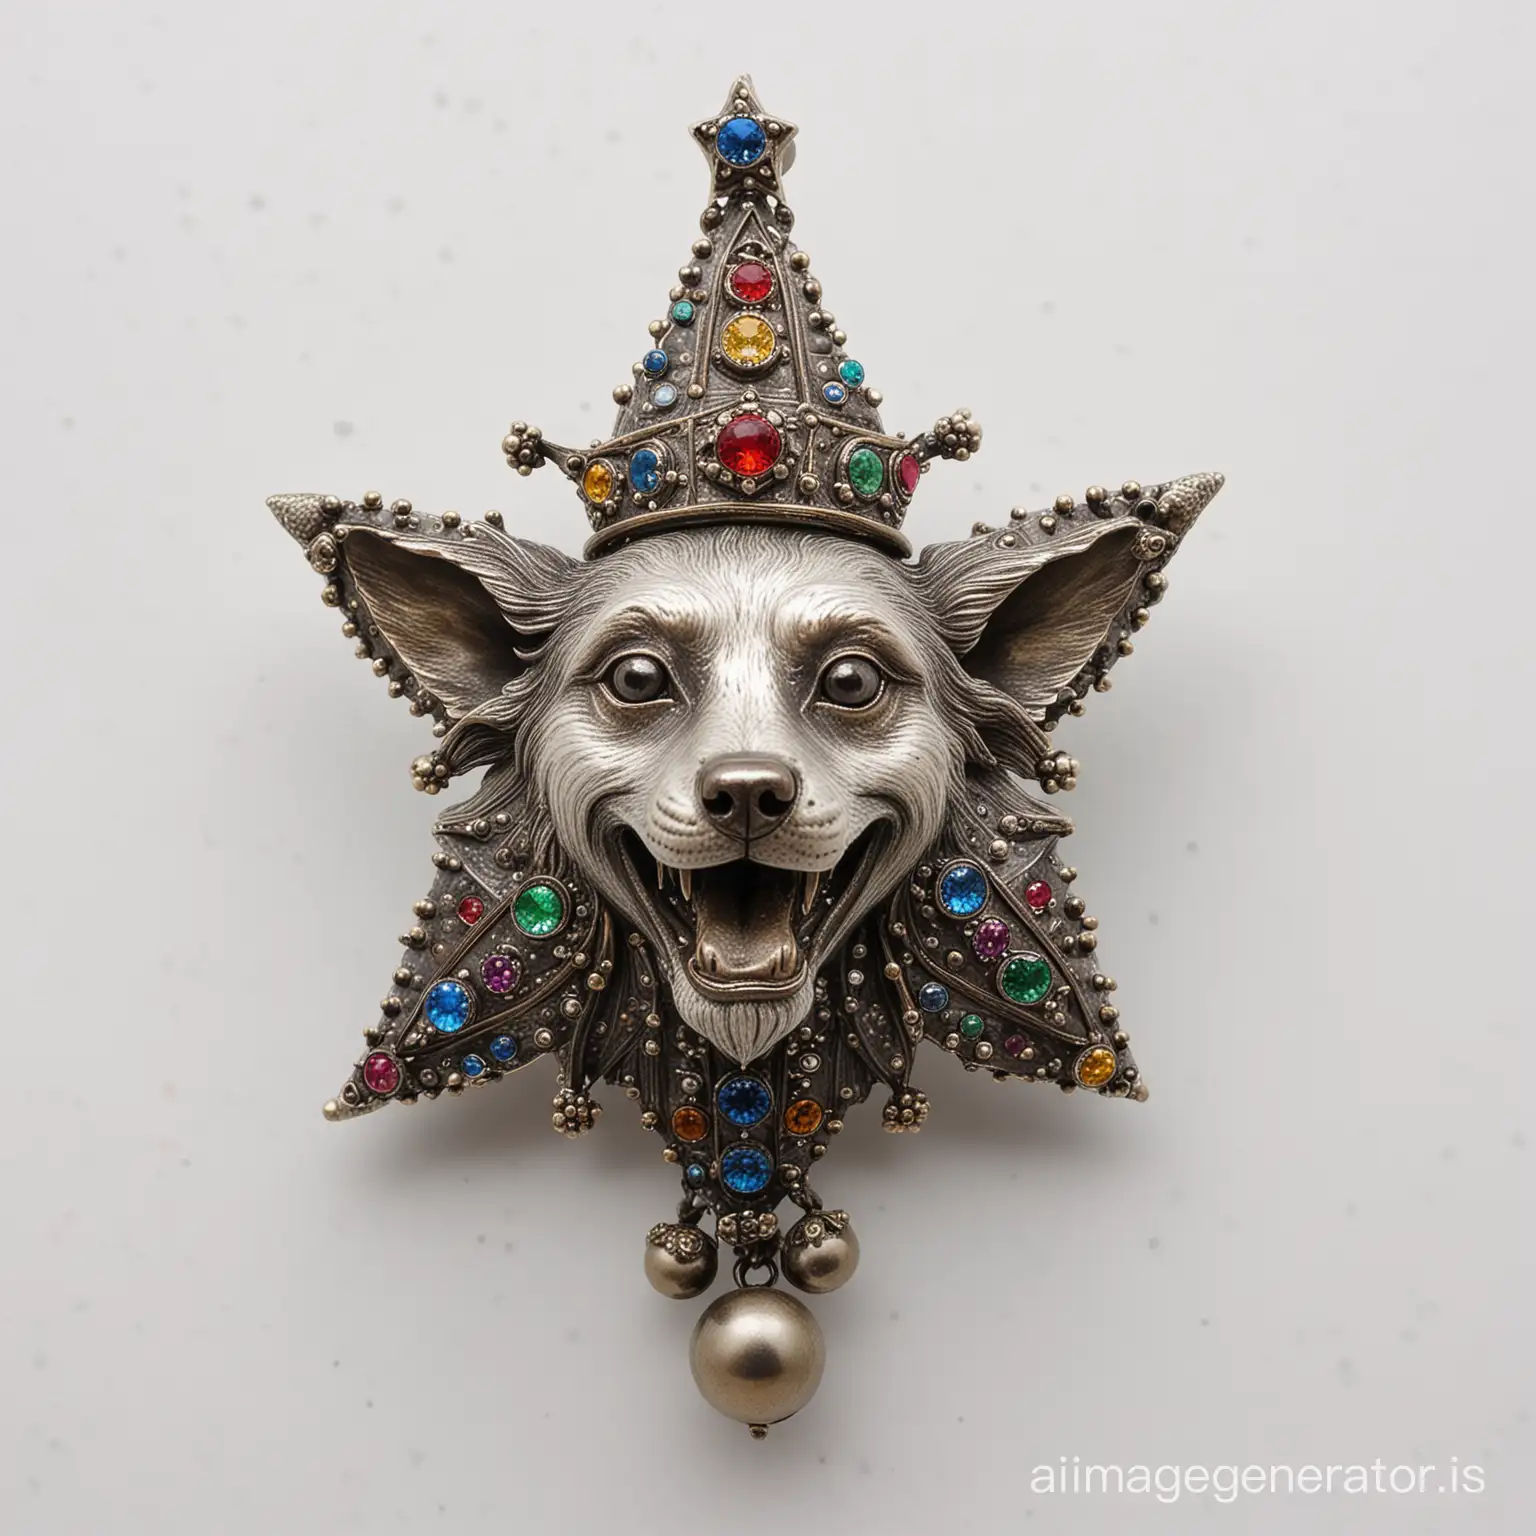 Hand crafted, Patinated, Bejewelled, medieval brooch featuring a crazy dogs face wearing a jesters hat with bells, a star shaped ruff and fine royal jewels as king in old silver and bronze on a white background 